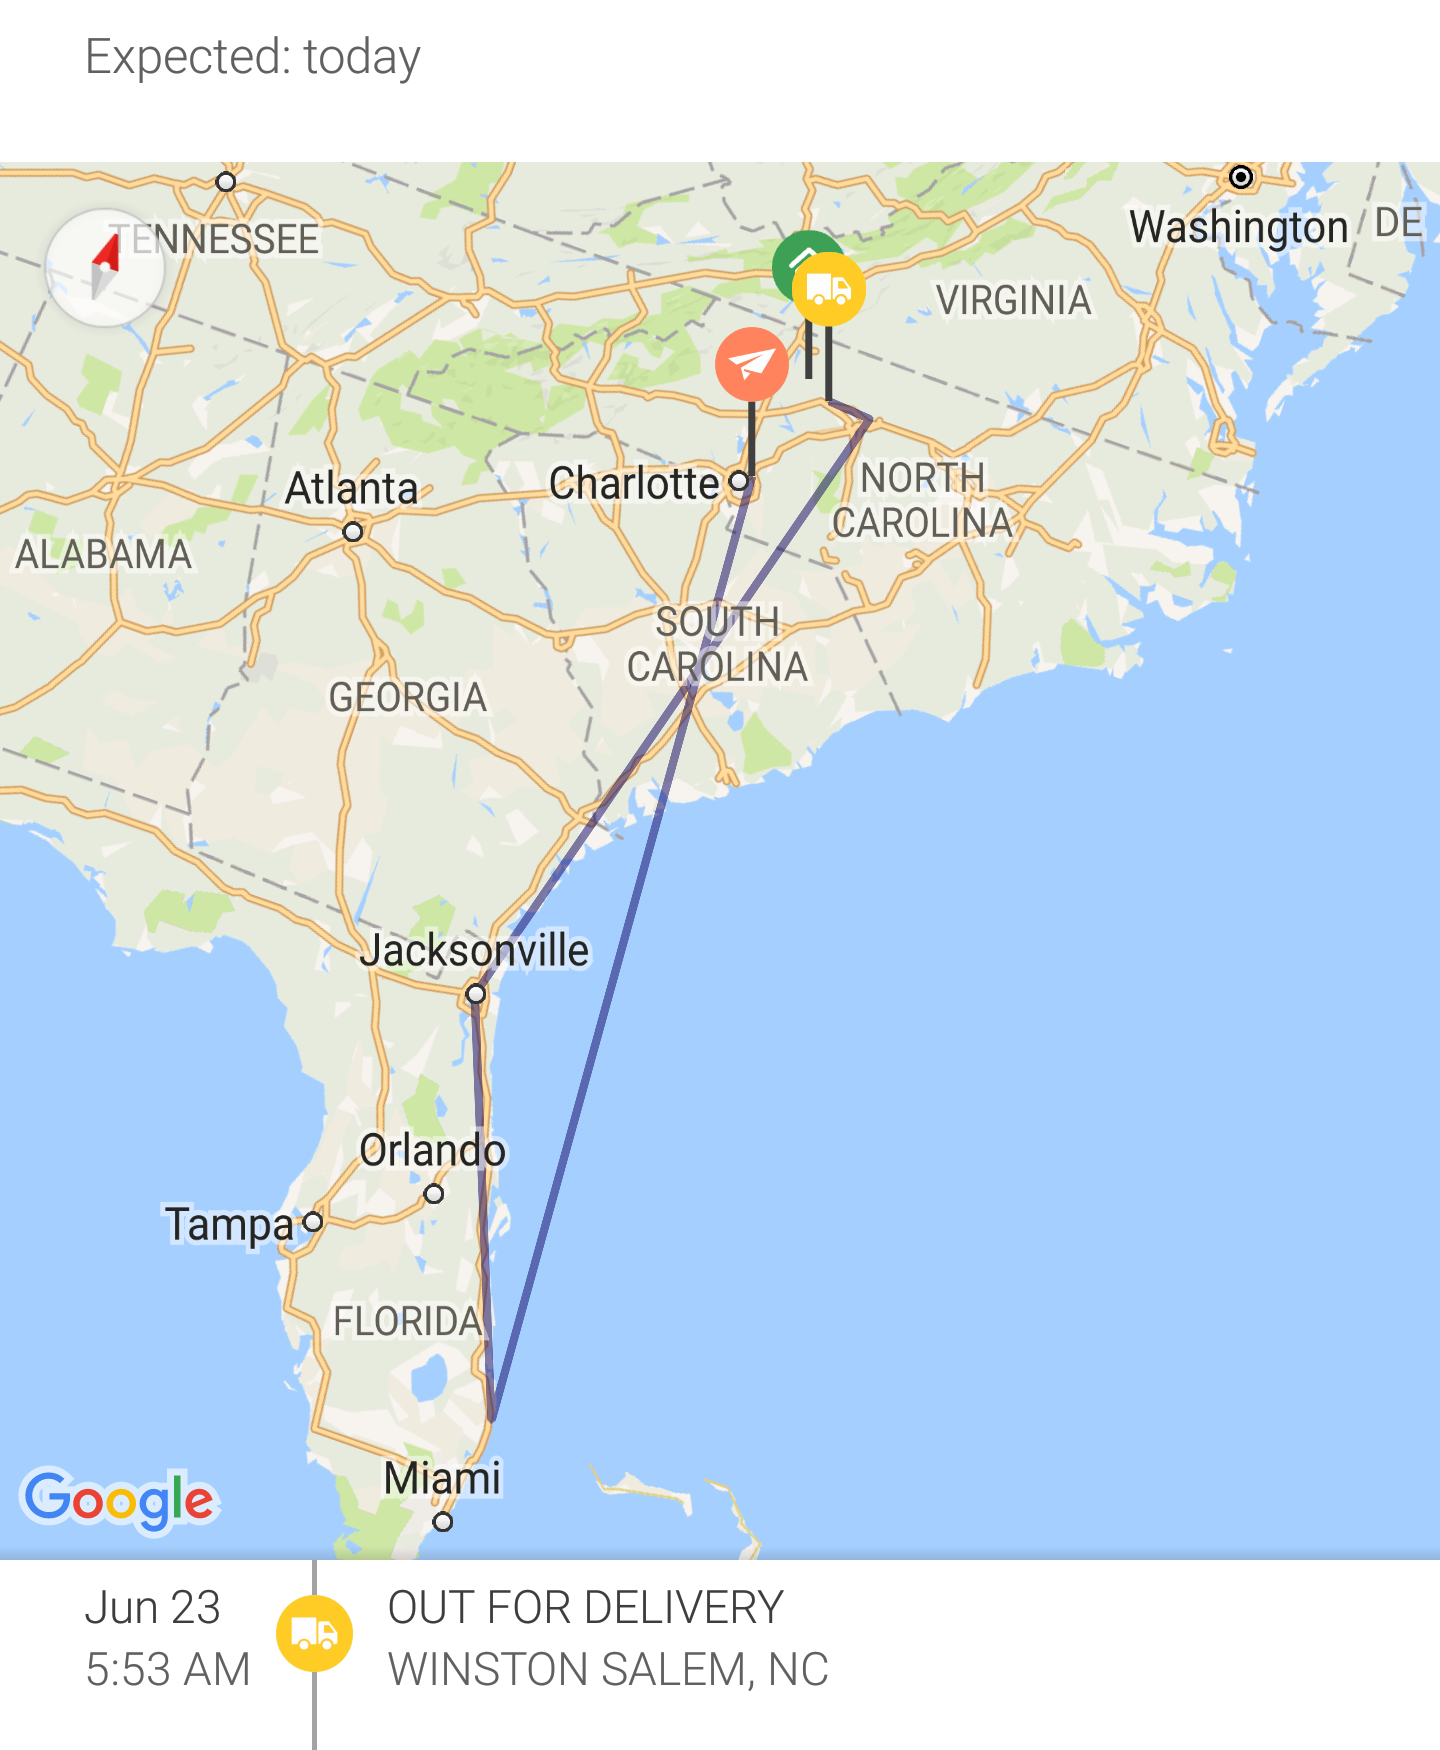 When your package needs to go from Charlotte to Winston-Salem, but UPS takes a shortcut through Florida